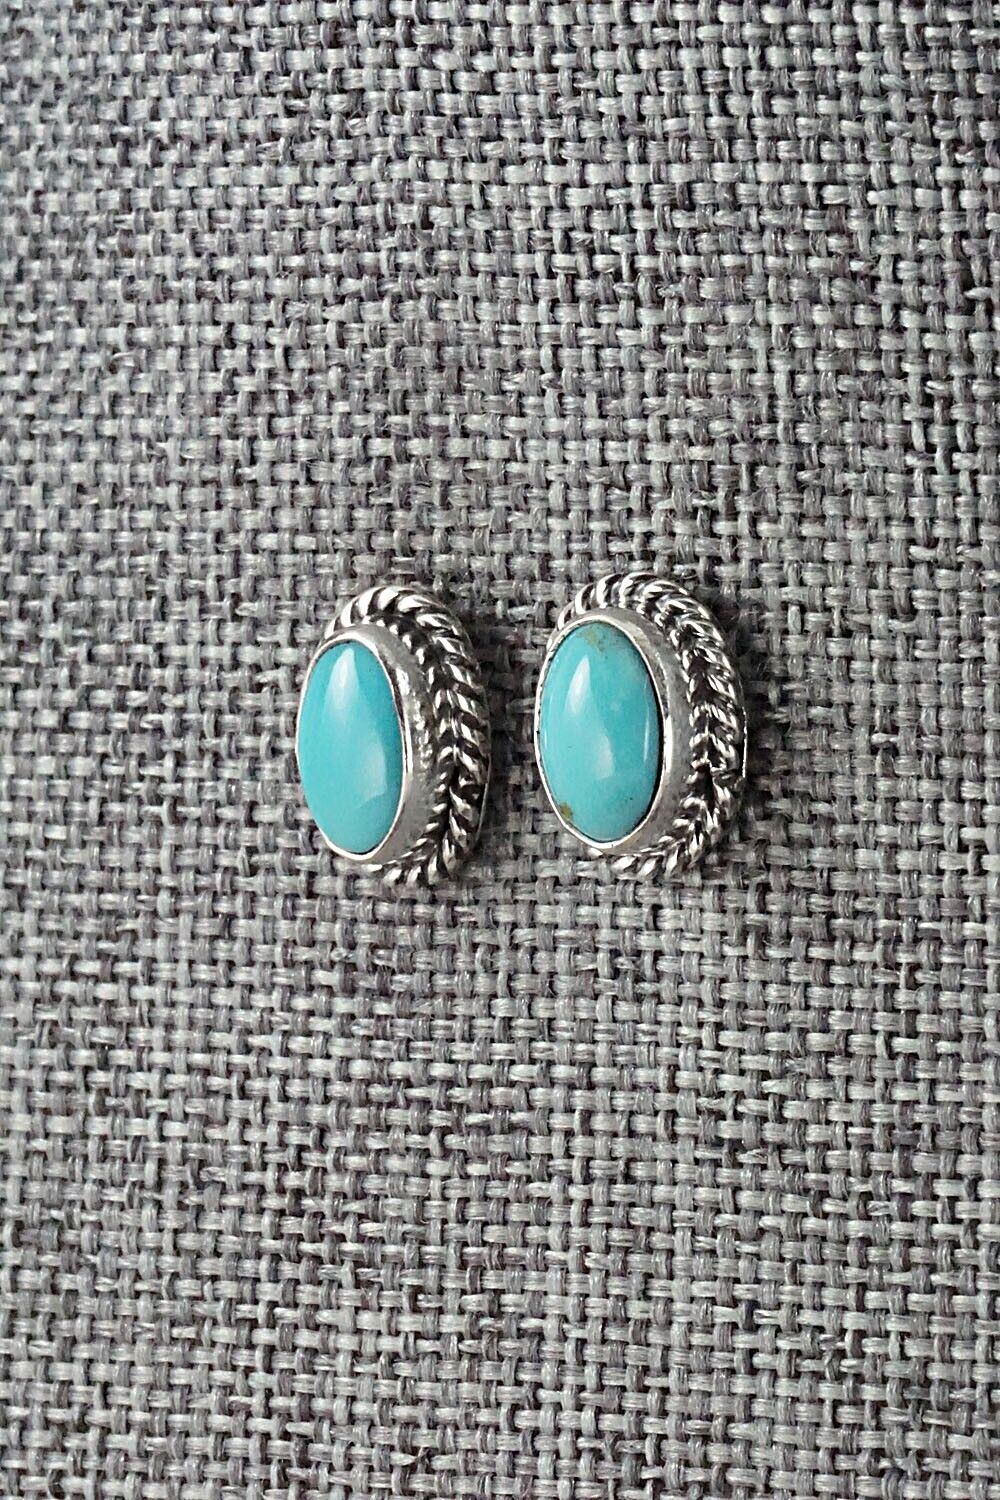 Turquoise & Sterling Silver Earrings - Jan Mariano